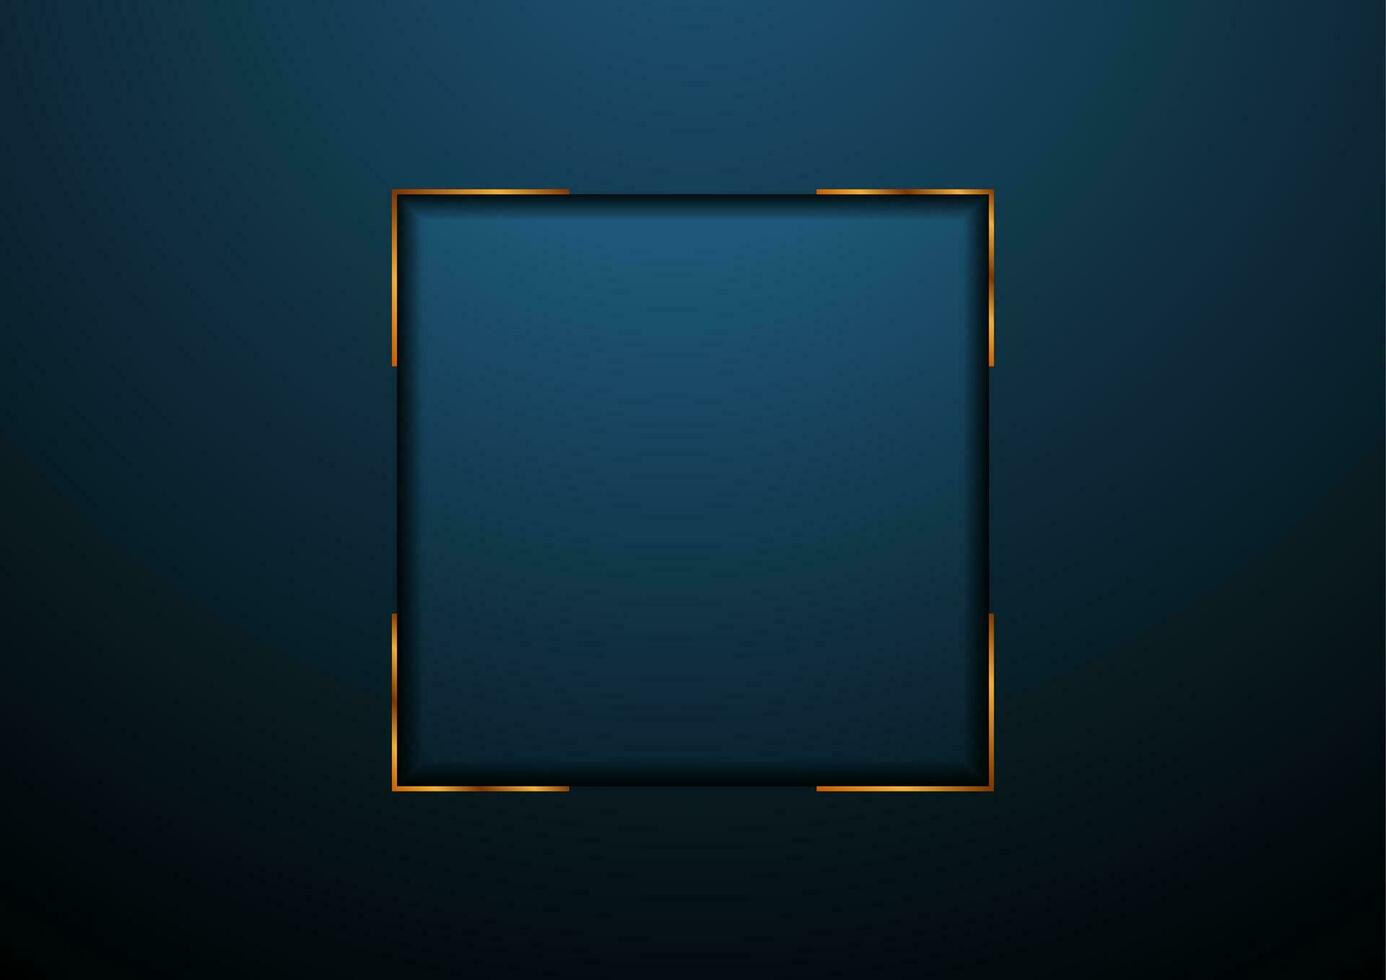 Dark blue and golden abstract square frame background vector